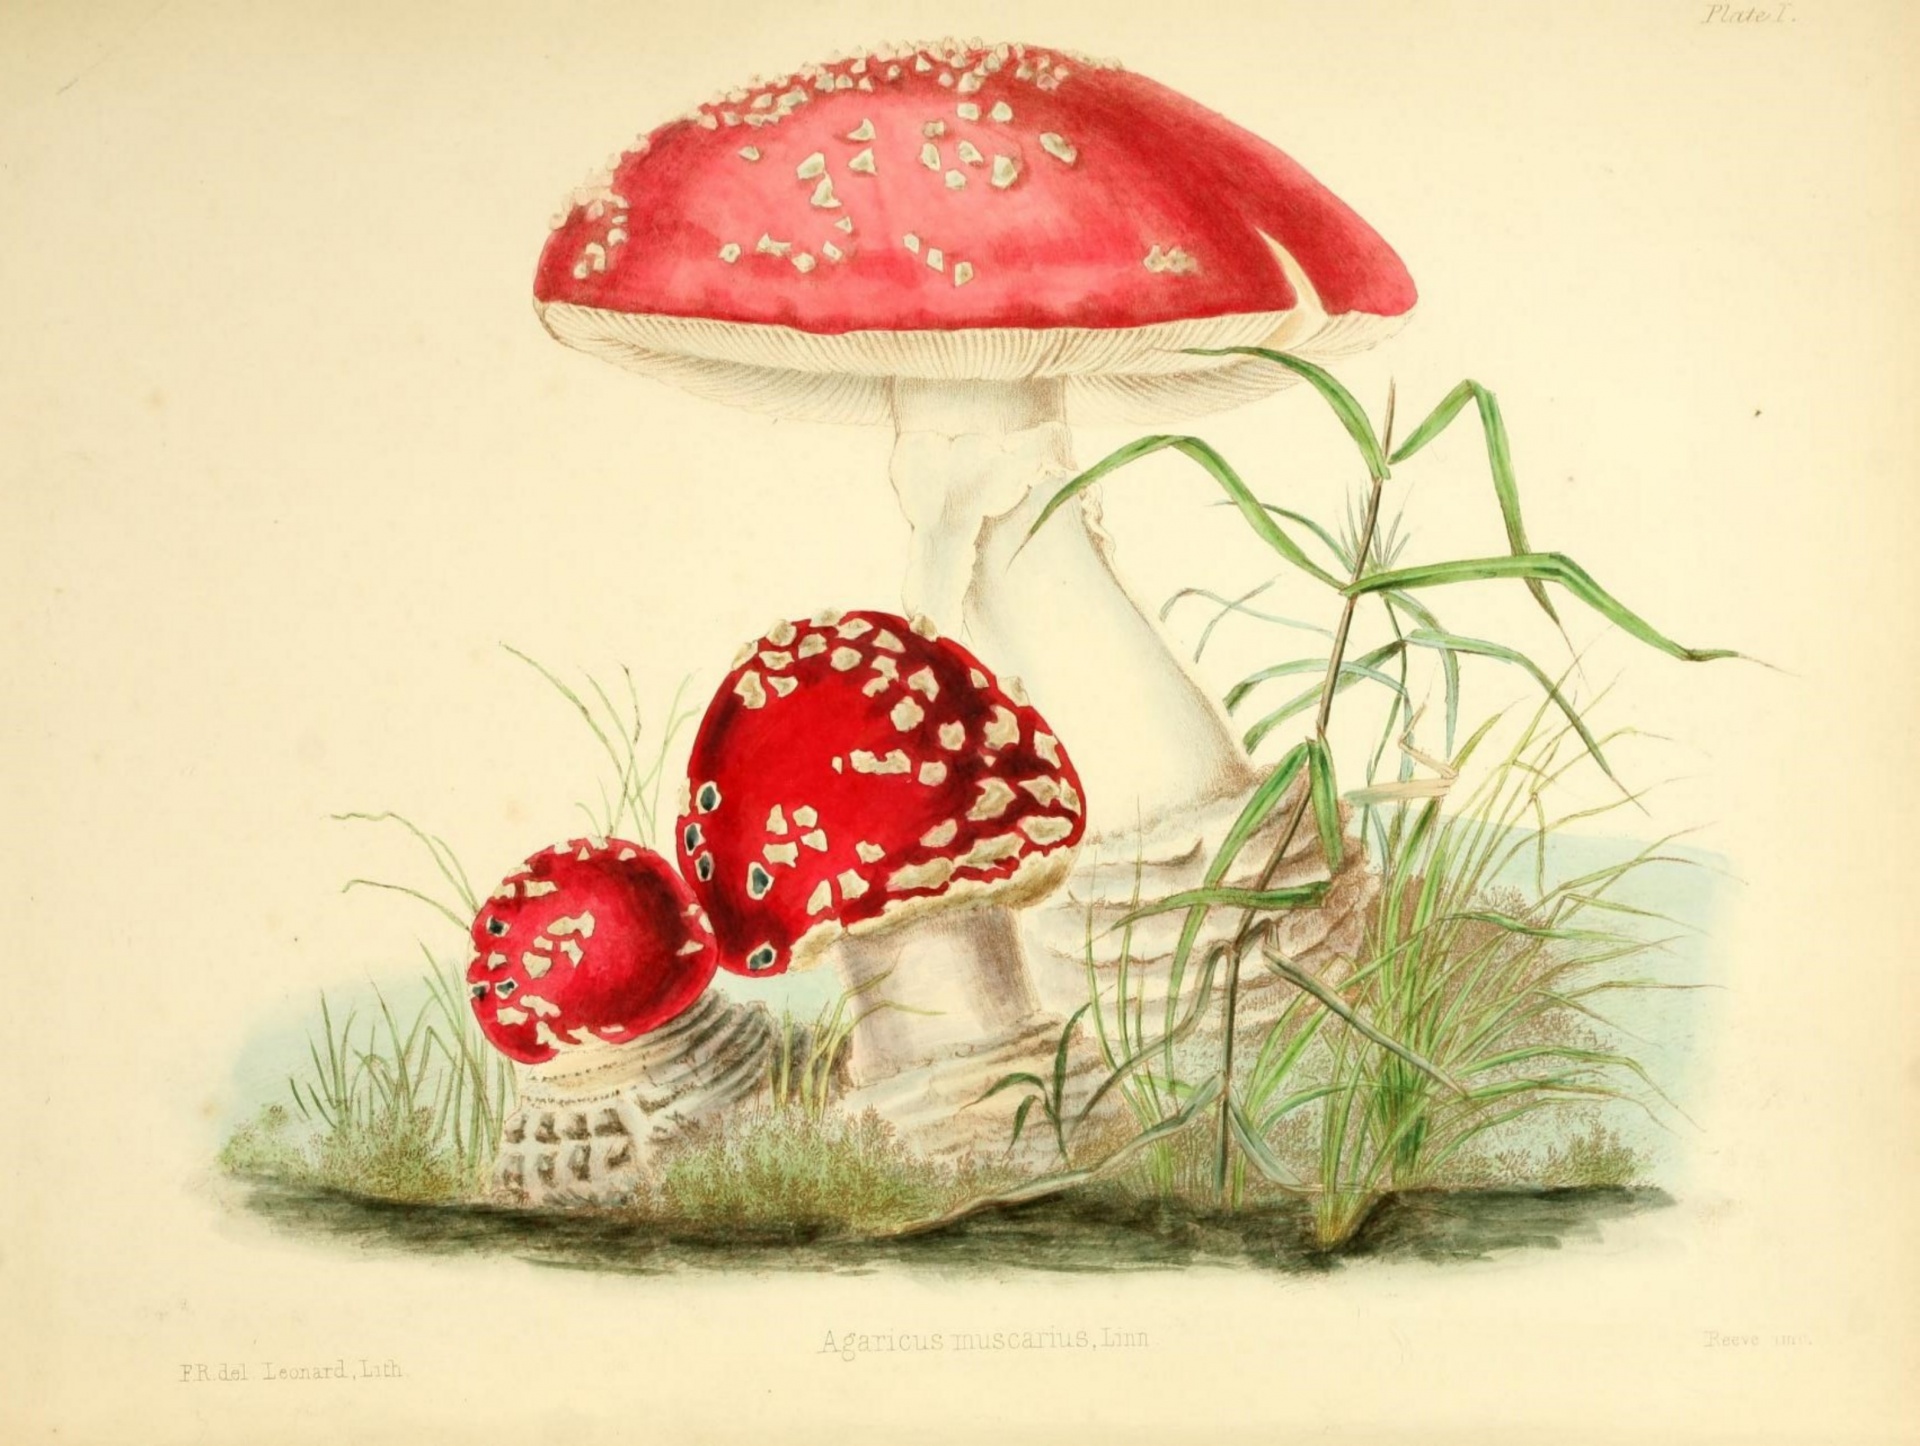 Vintage art champions mushrooms illustration old antique hand painted drawing painting public domain image restored